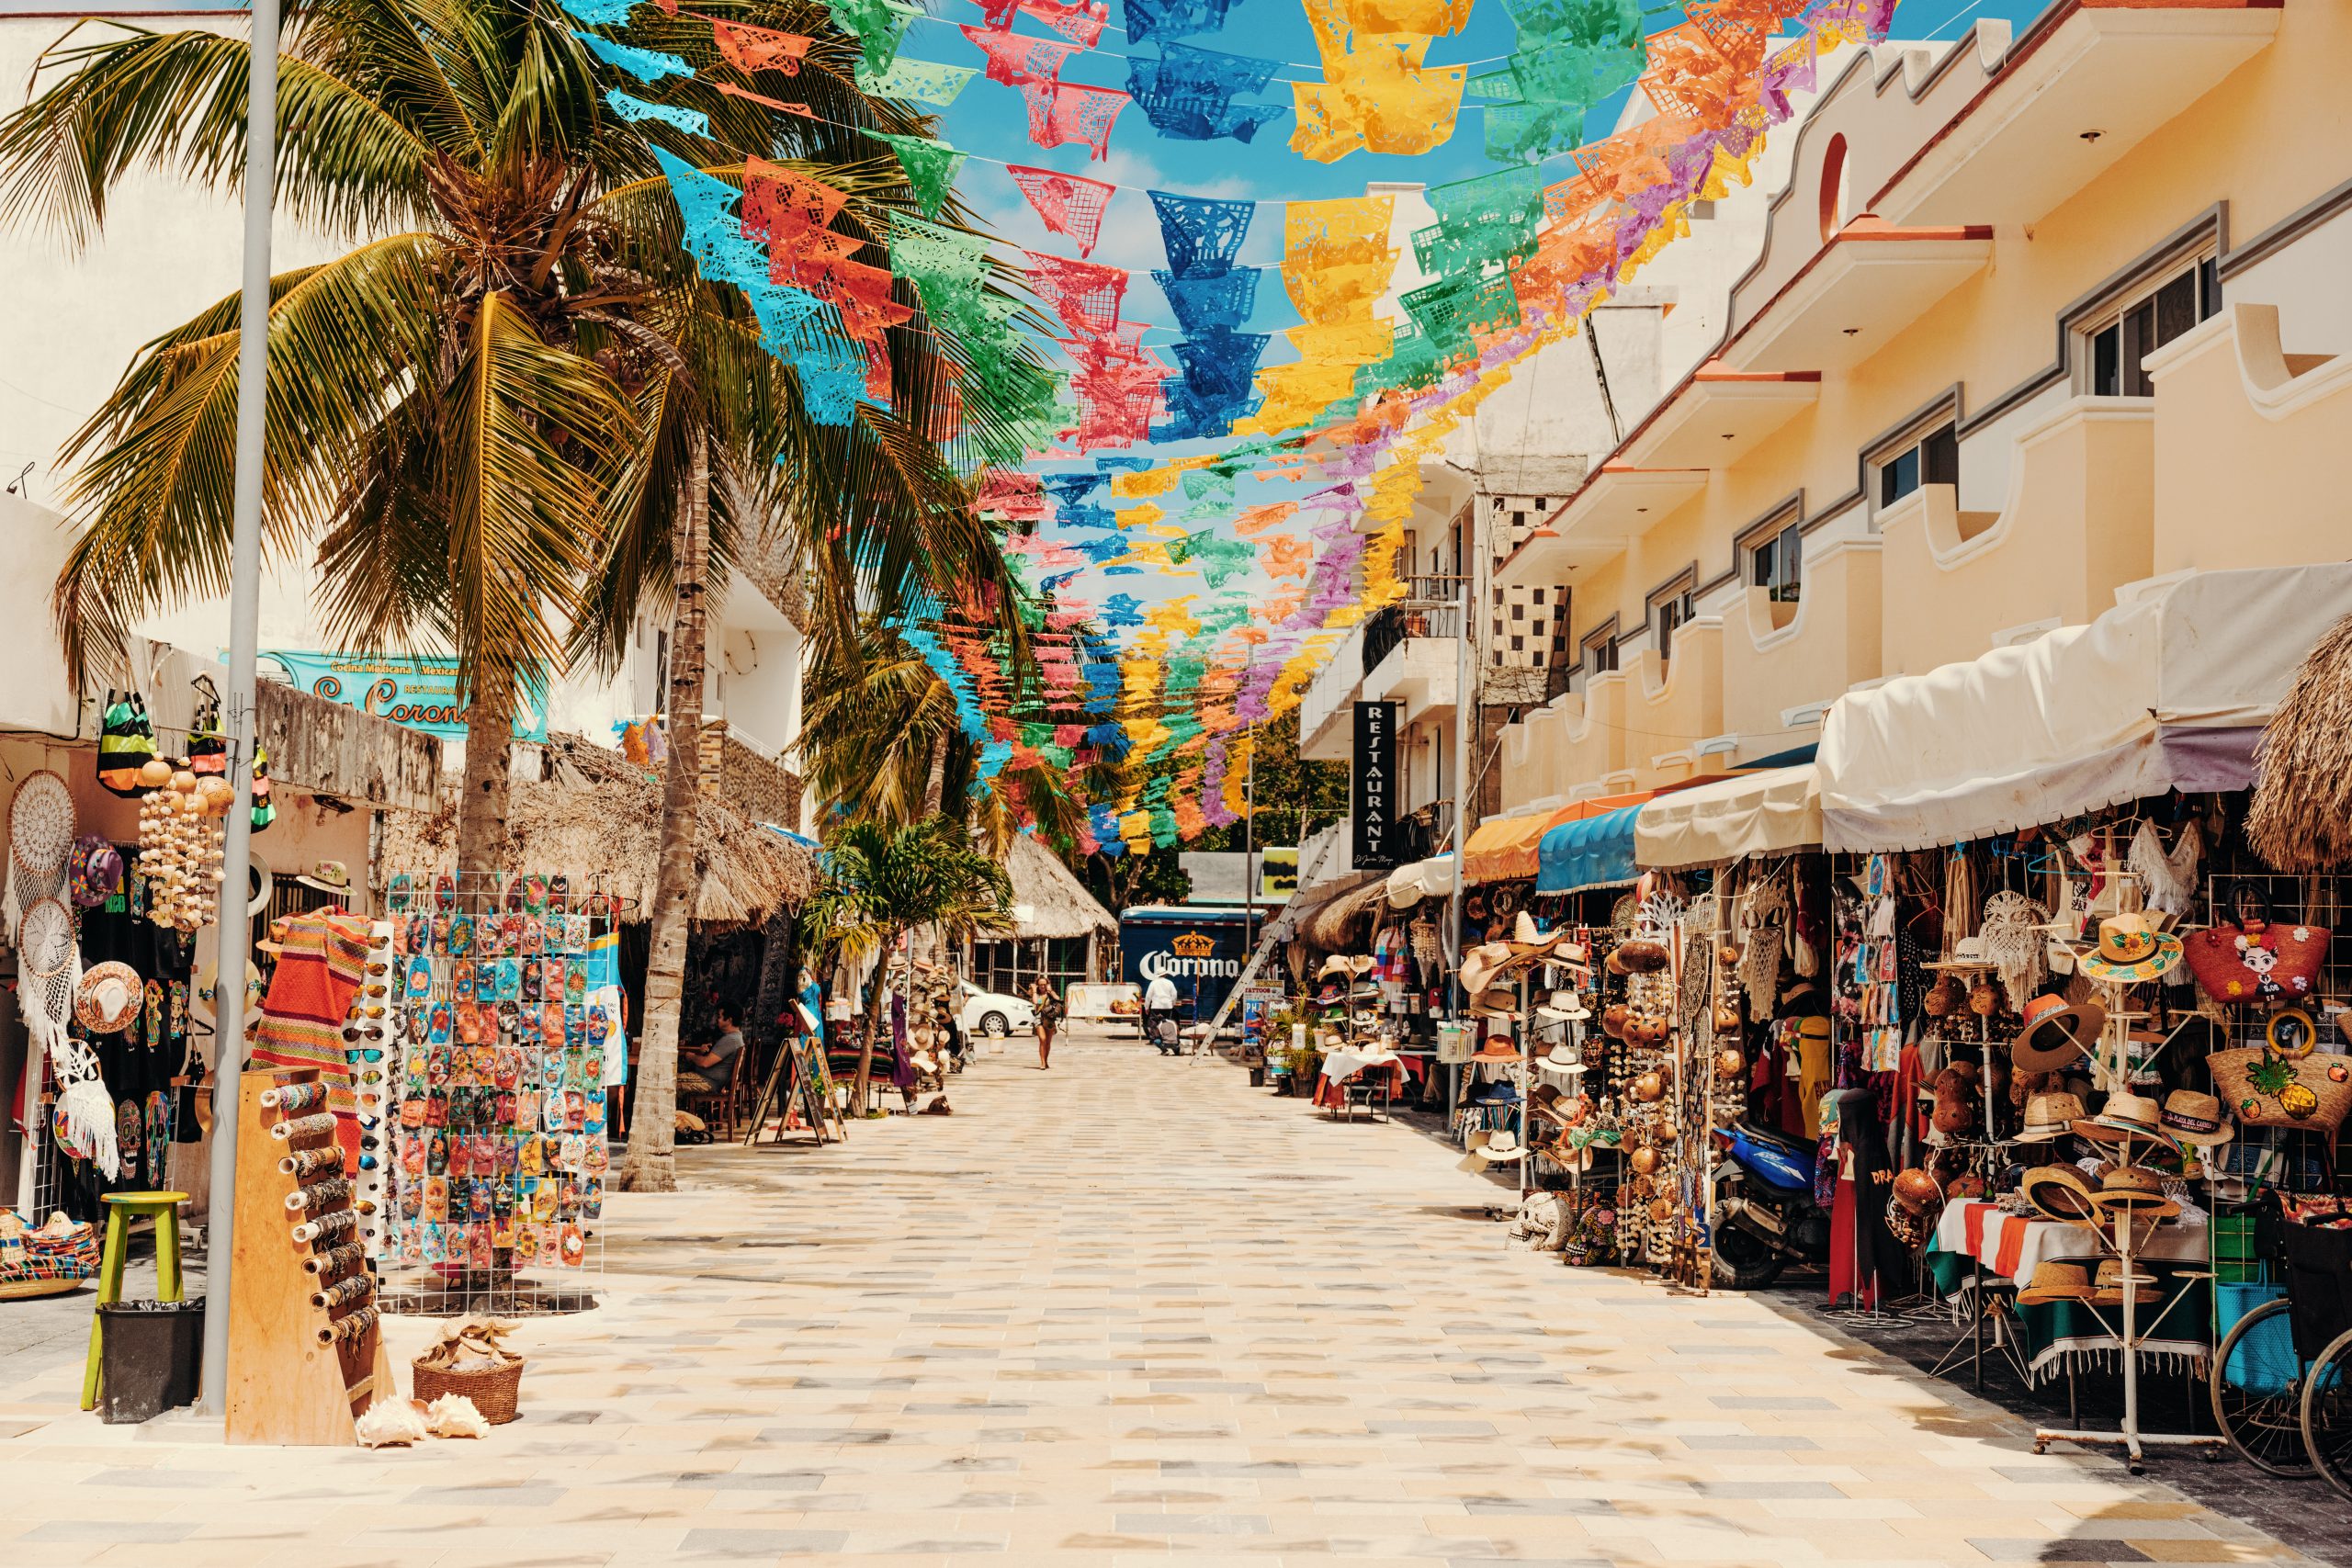 Beautiful Cozumel Mexico Street. Very colourful.